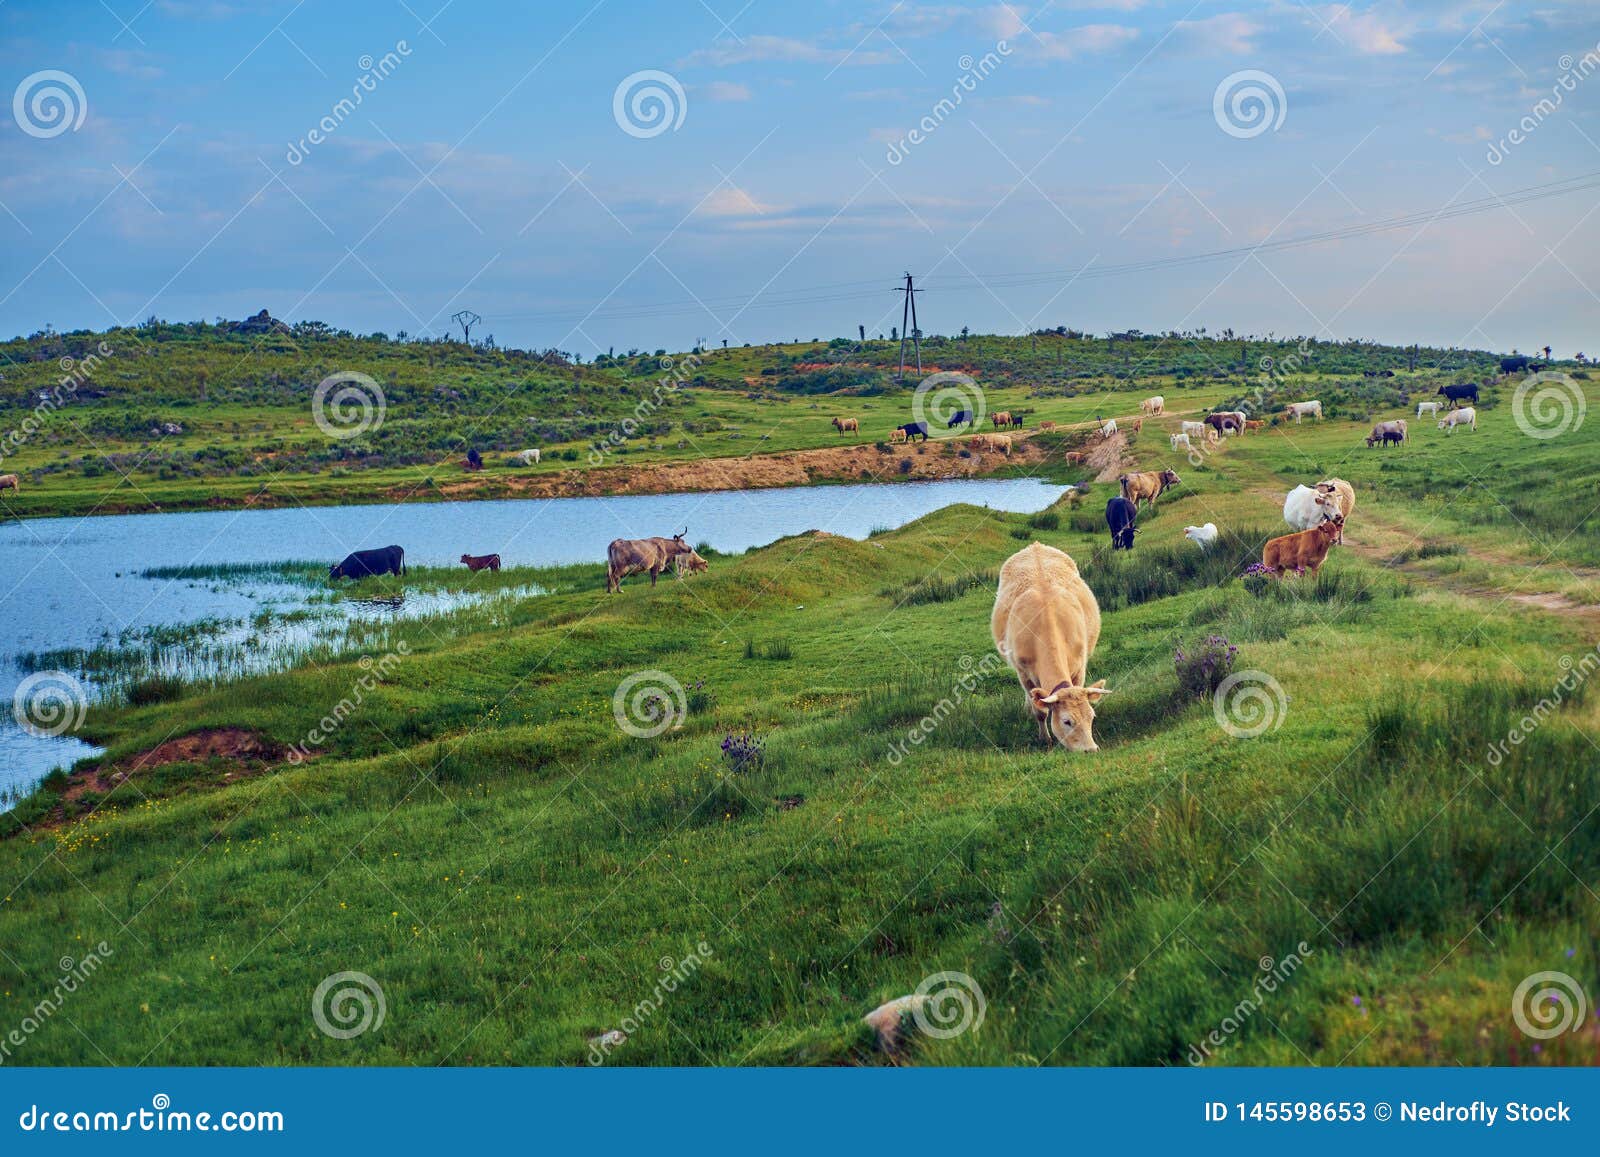 cows grazing in a pasture meadow of extremadura with a lake in the background